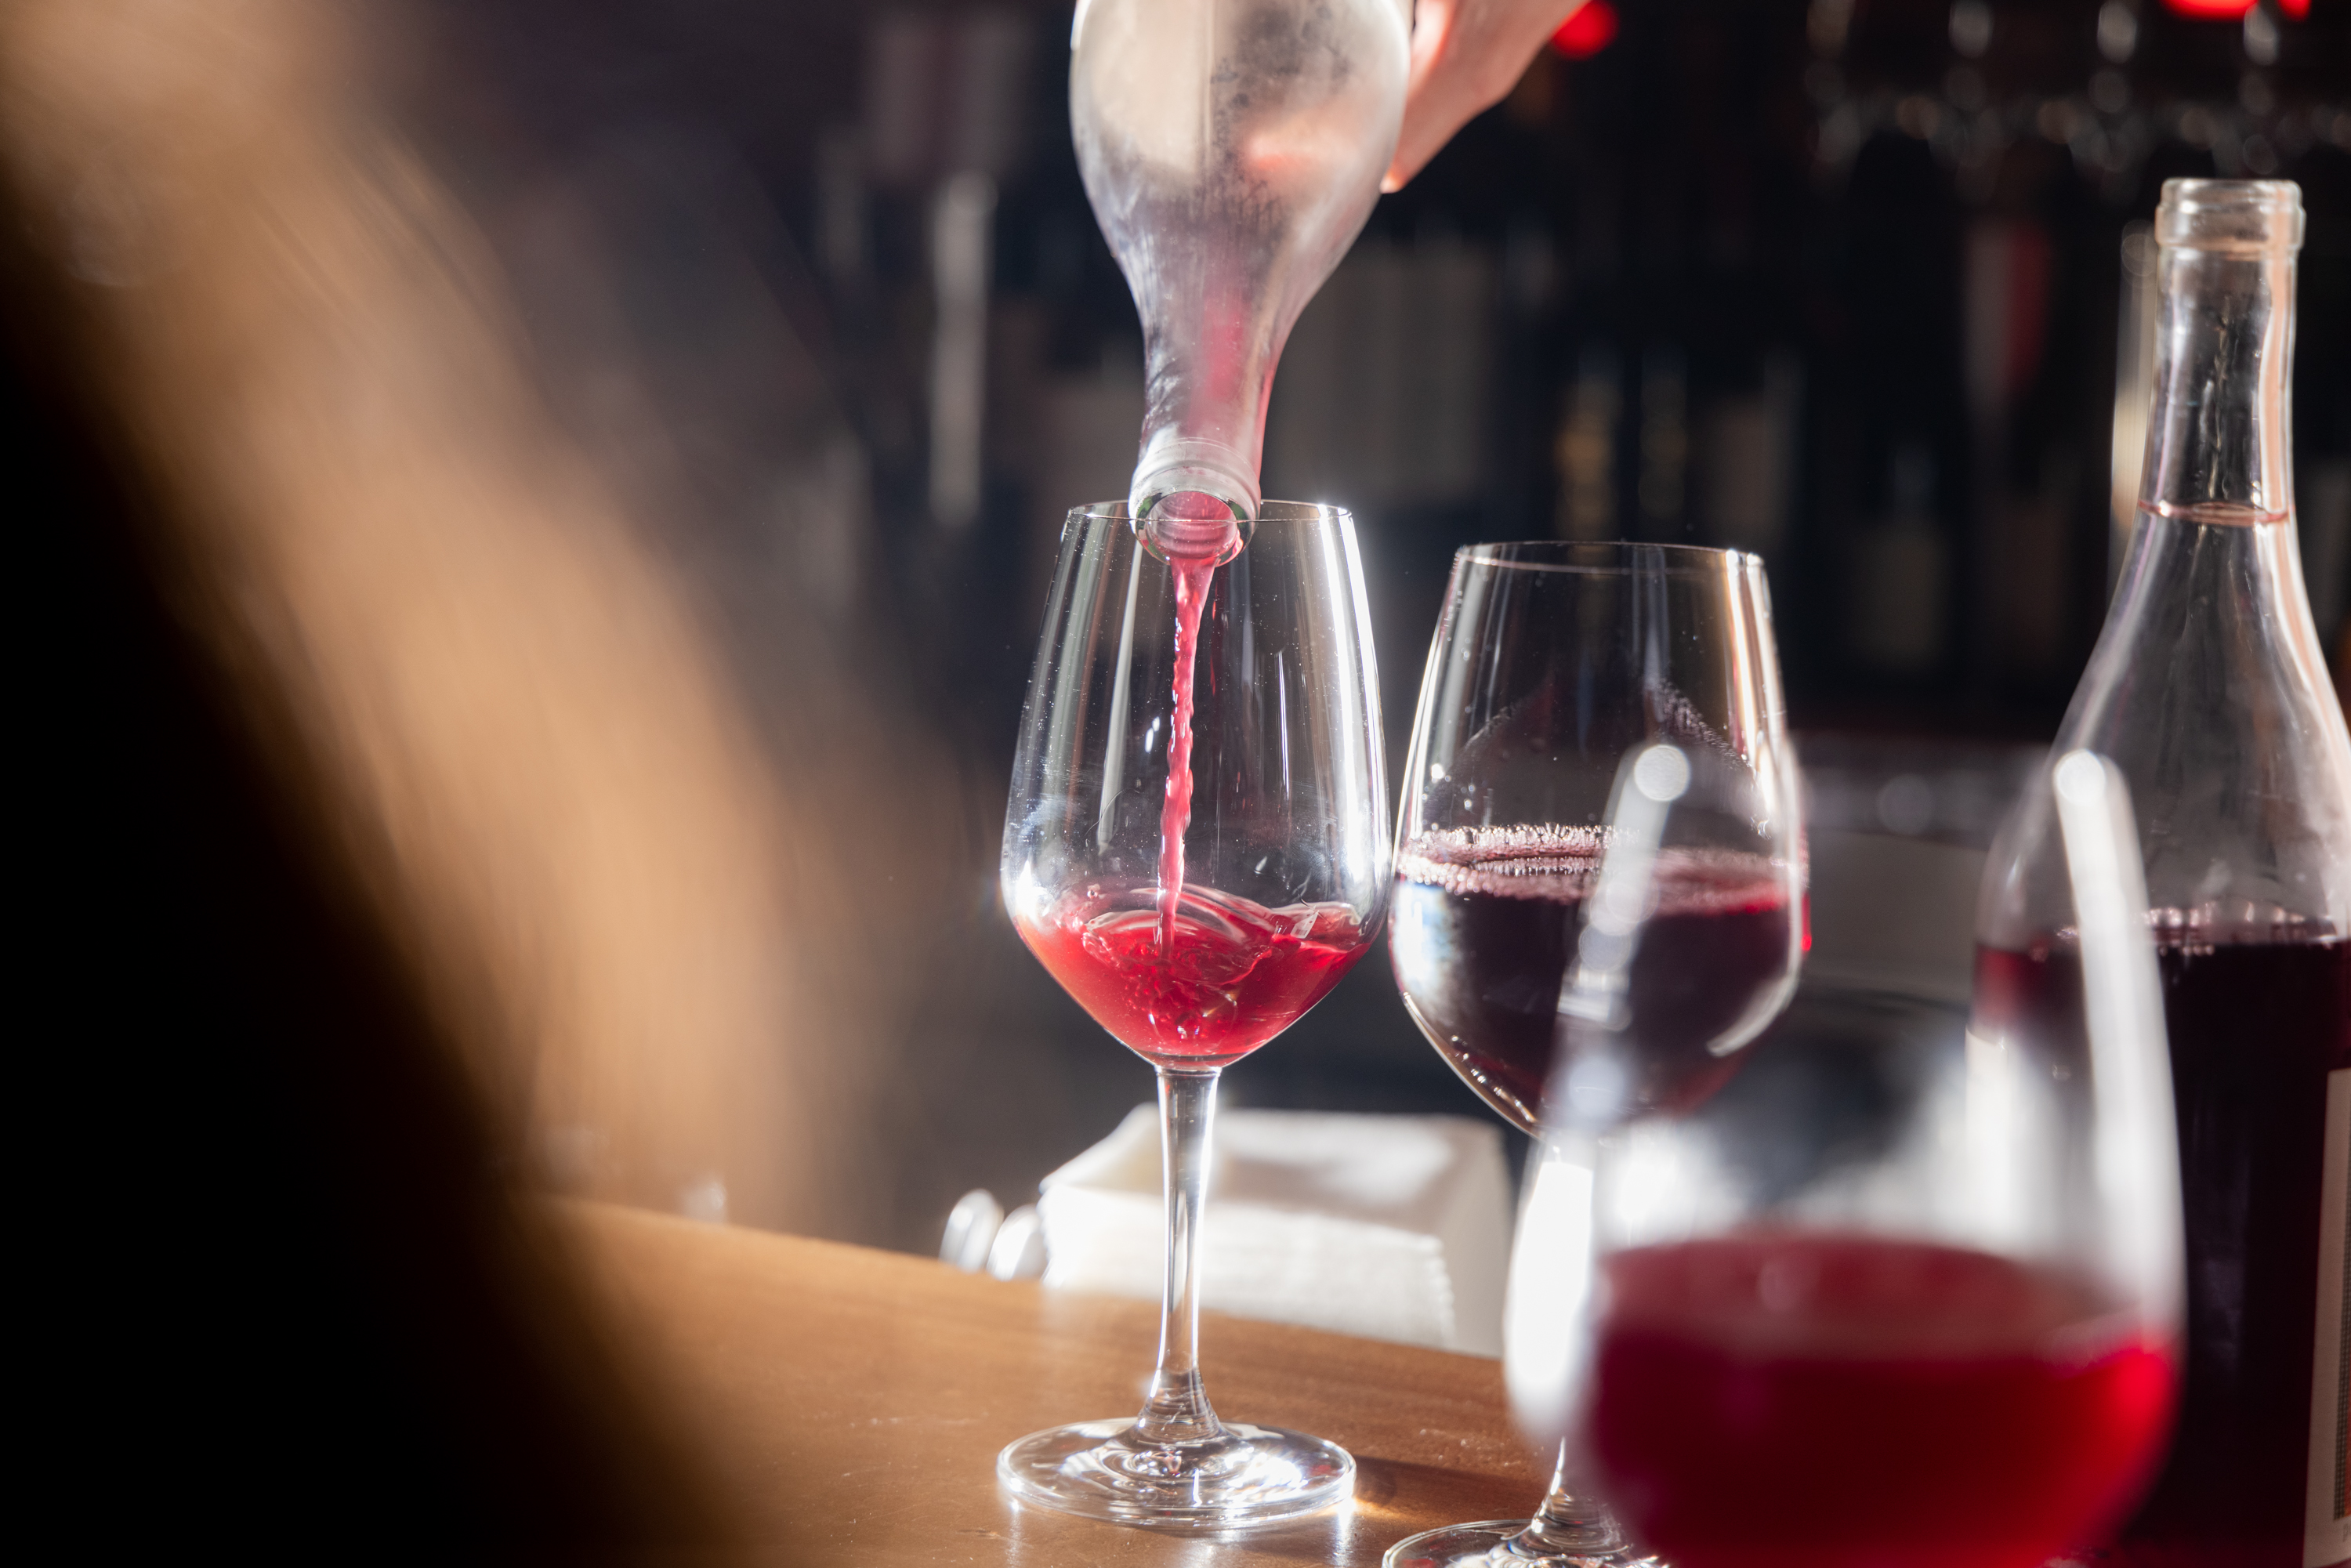 A hand is pouring red wine from a clear bottle into a wine glass on a bar counter, surrounded by other filled and partially filled wine glasses.